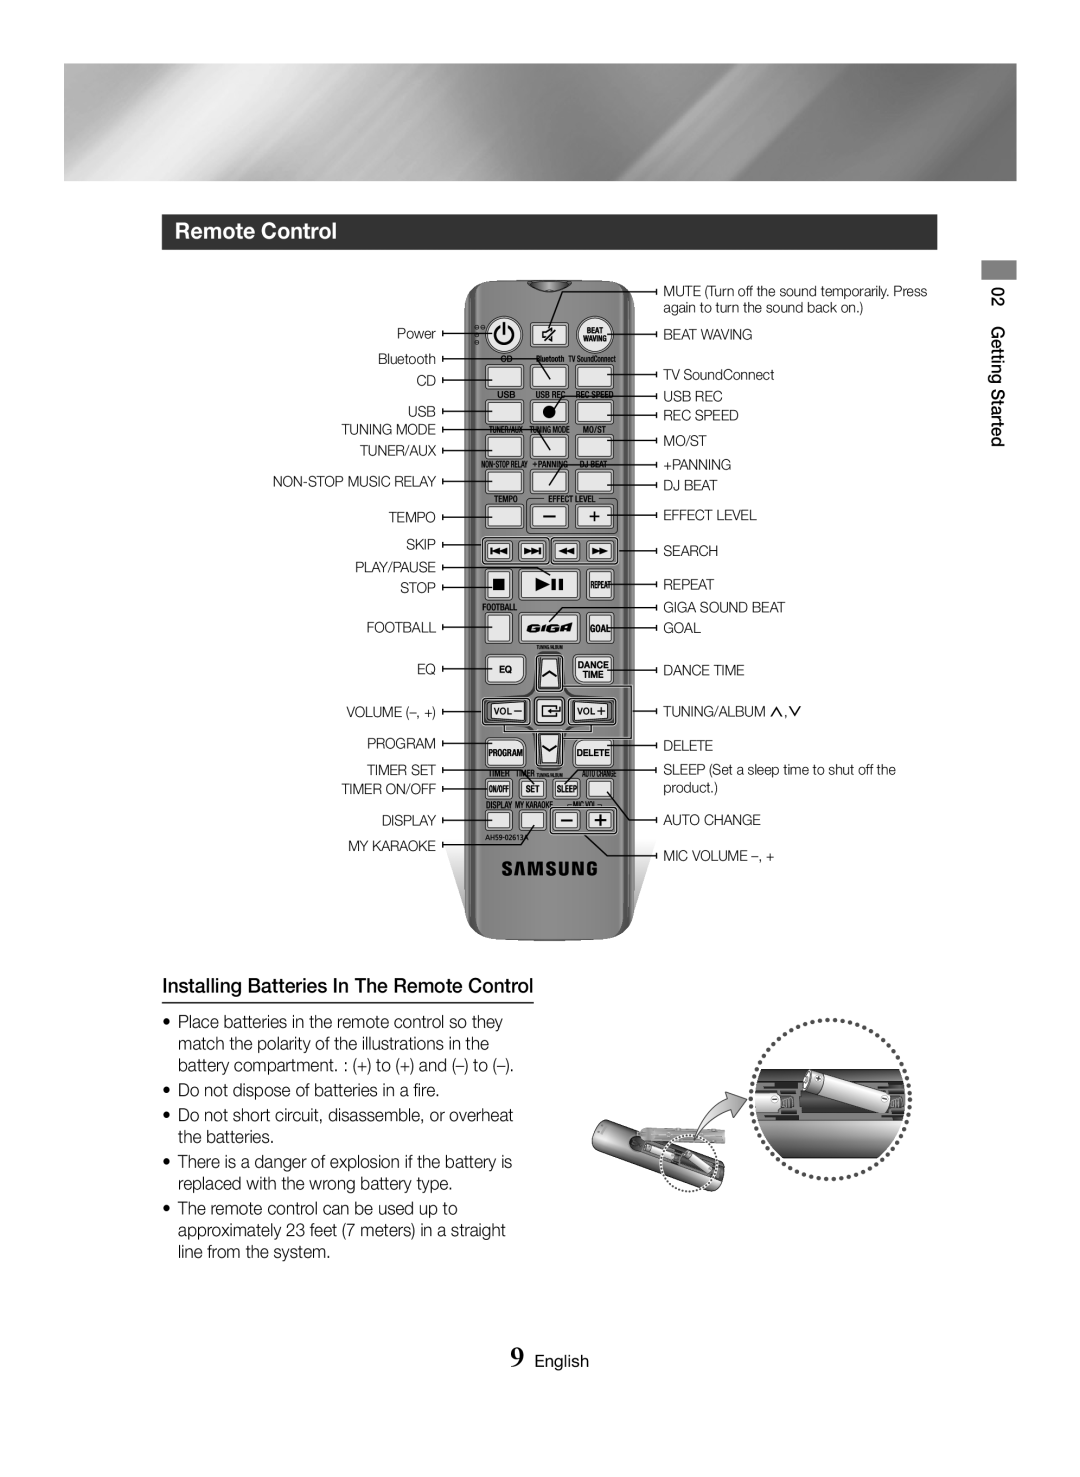 Samsung MX-HS8000/ZF, MX-HS8000/EN manual Installing Batteries In The Remote Control, Getting Started, English 